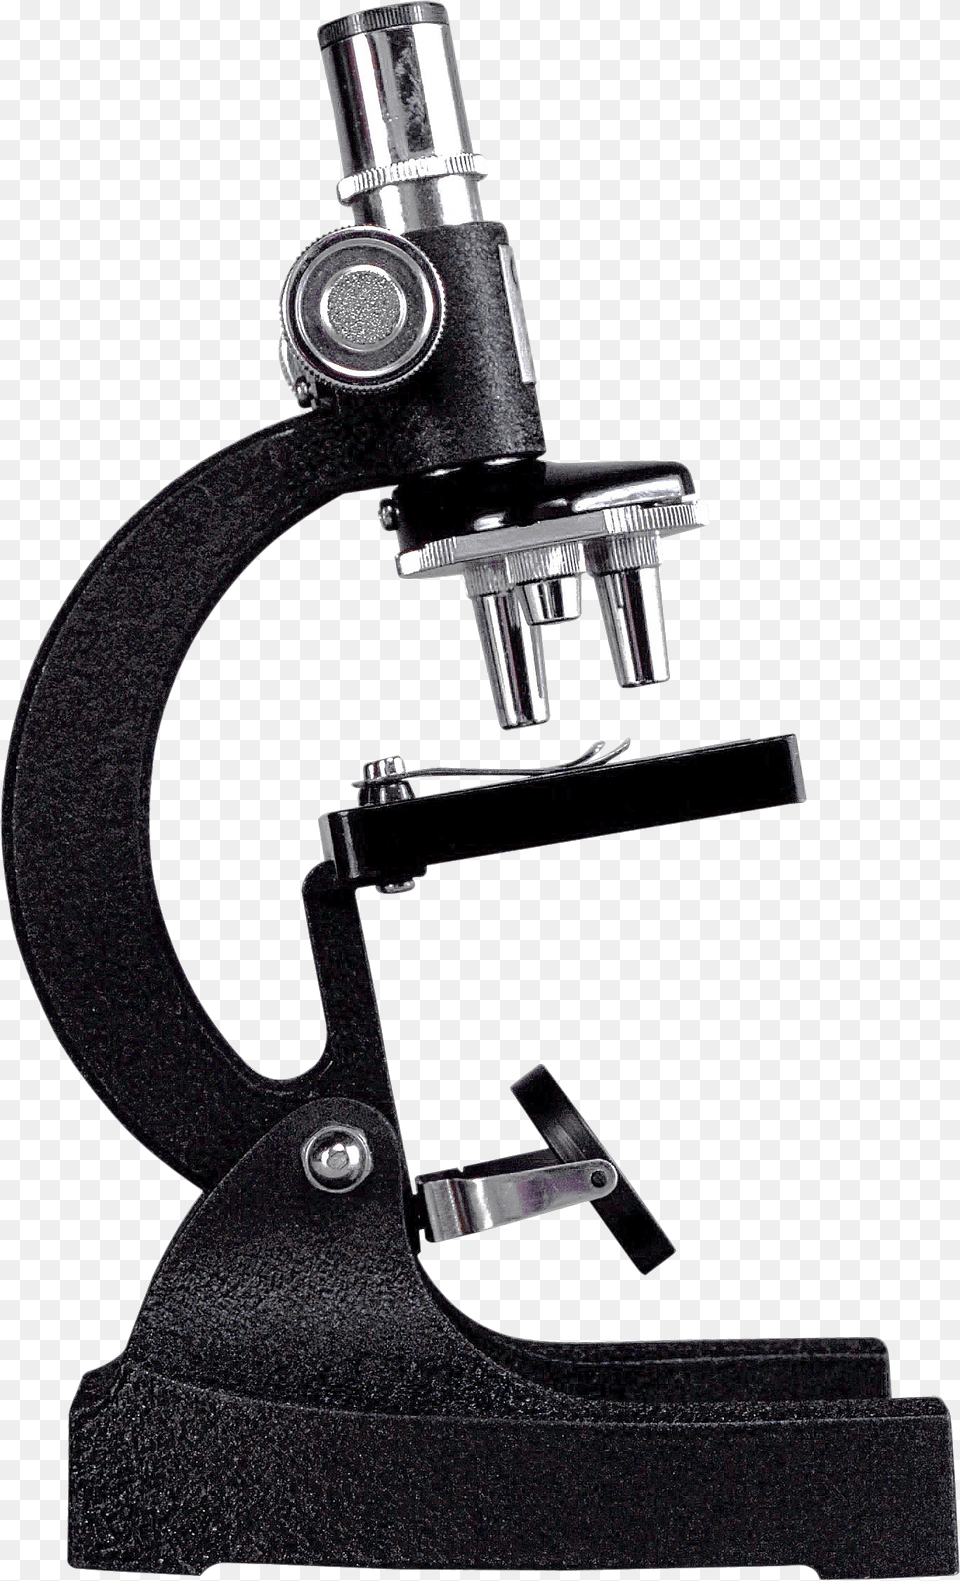 Download This High Resolution Microscope In Microscope Png Image